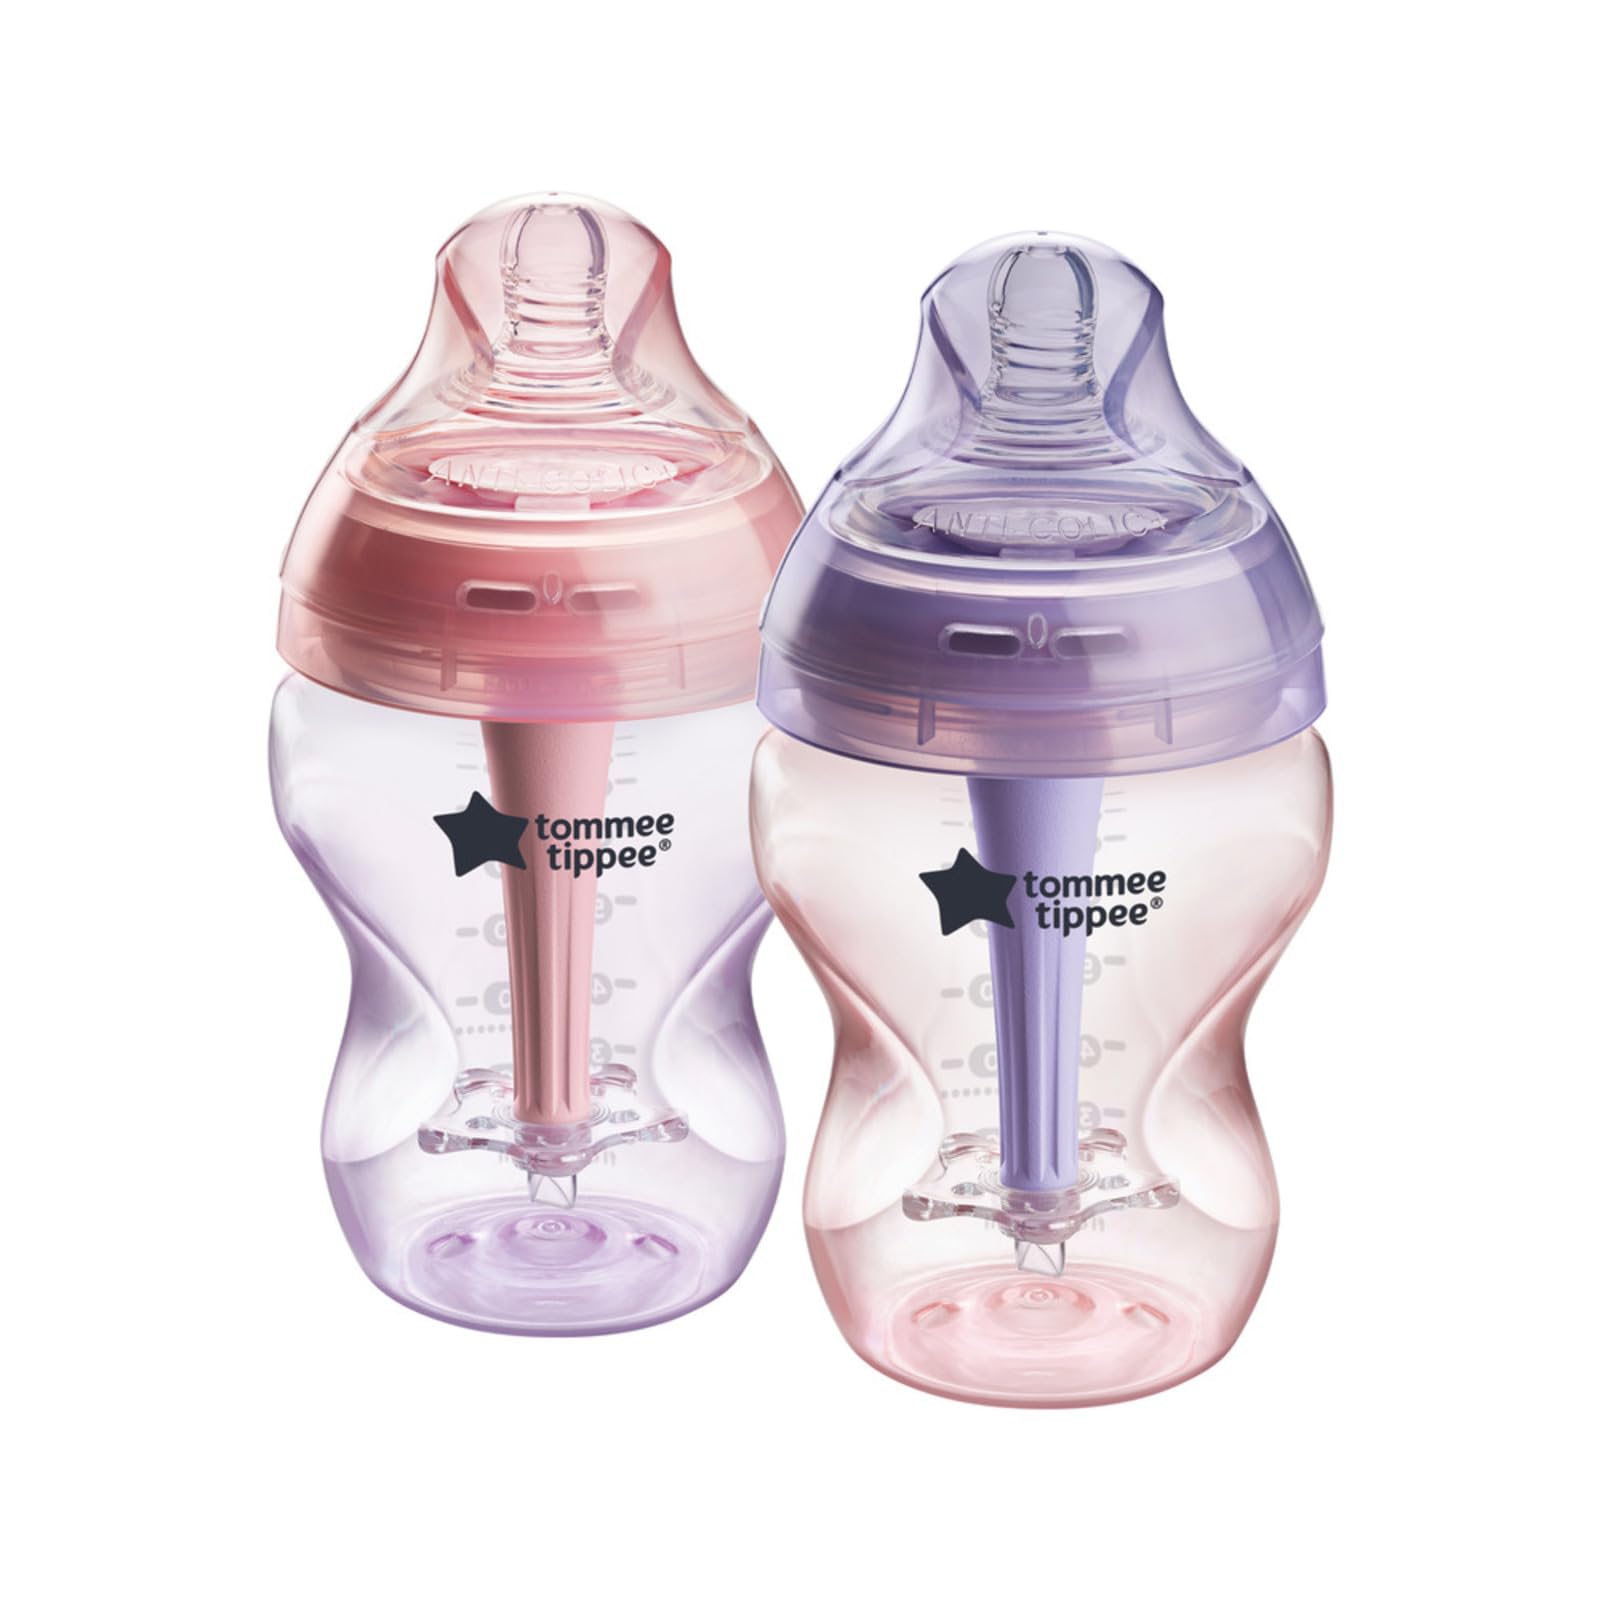 Tommee Tippee Baby Bottles, Advanced Anti-Colic Baby Bottle with Slow & Medium Flow Breast-Like Nipple, 5oz, 0m+, Baby Feeding Essentials, Pack of 1